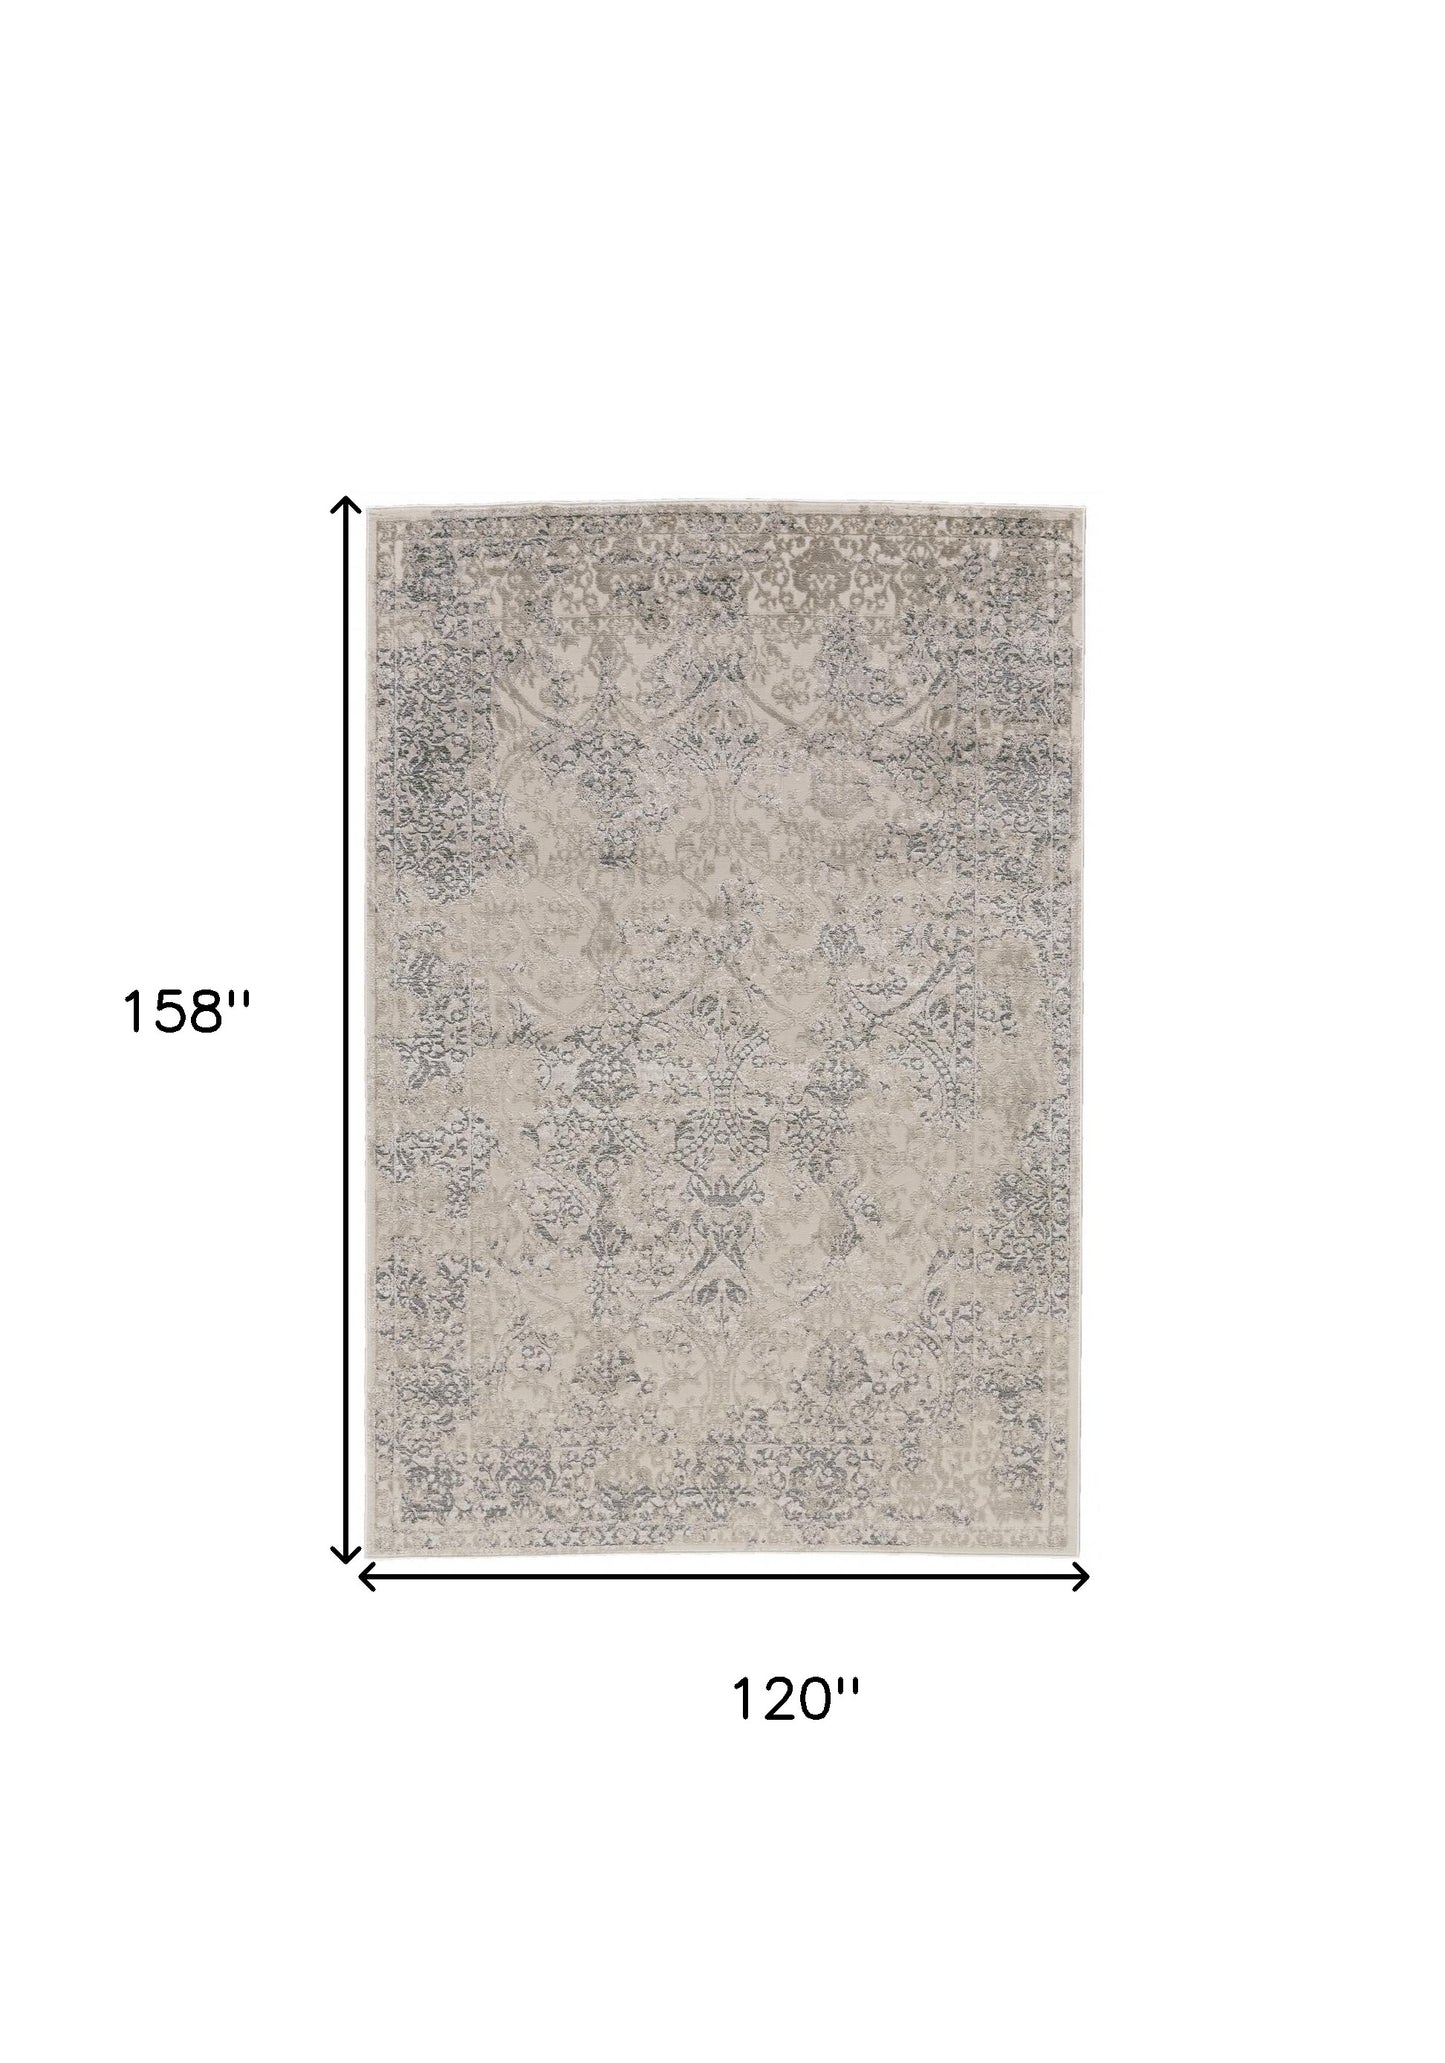 5' X 8' Ivory Gray And Black Abstract Stain Resistant Area Rug